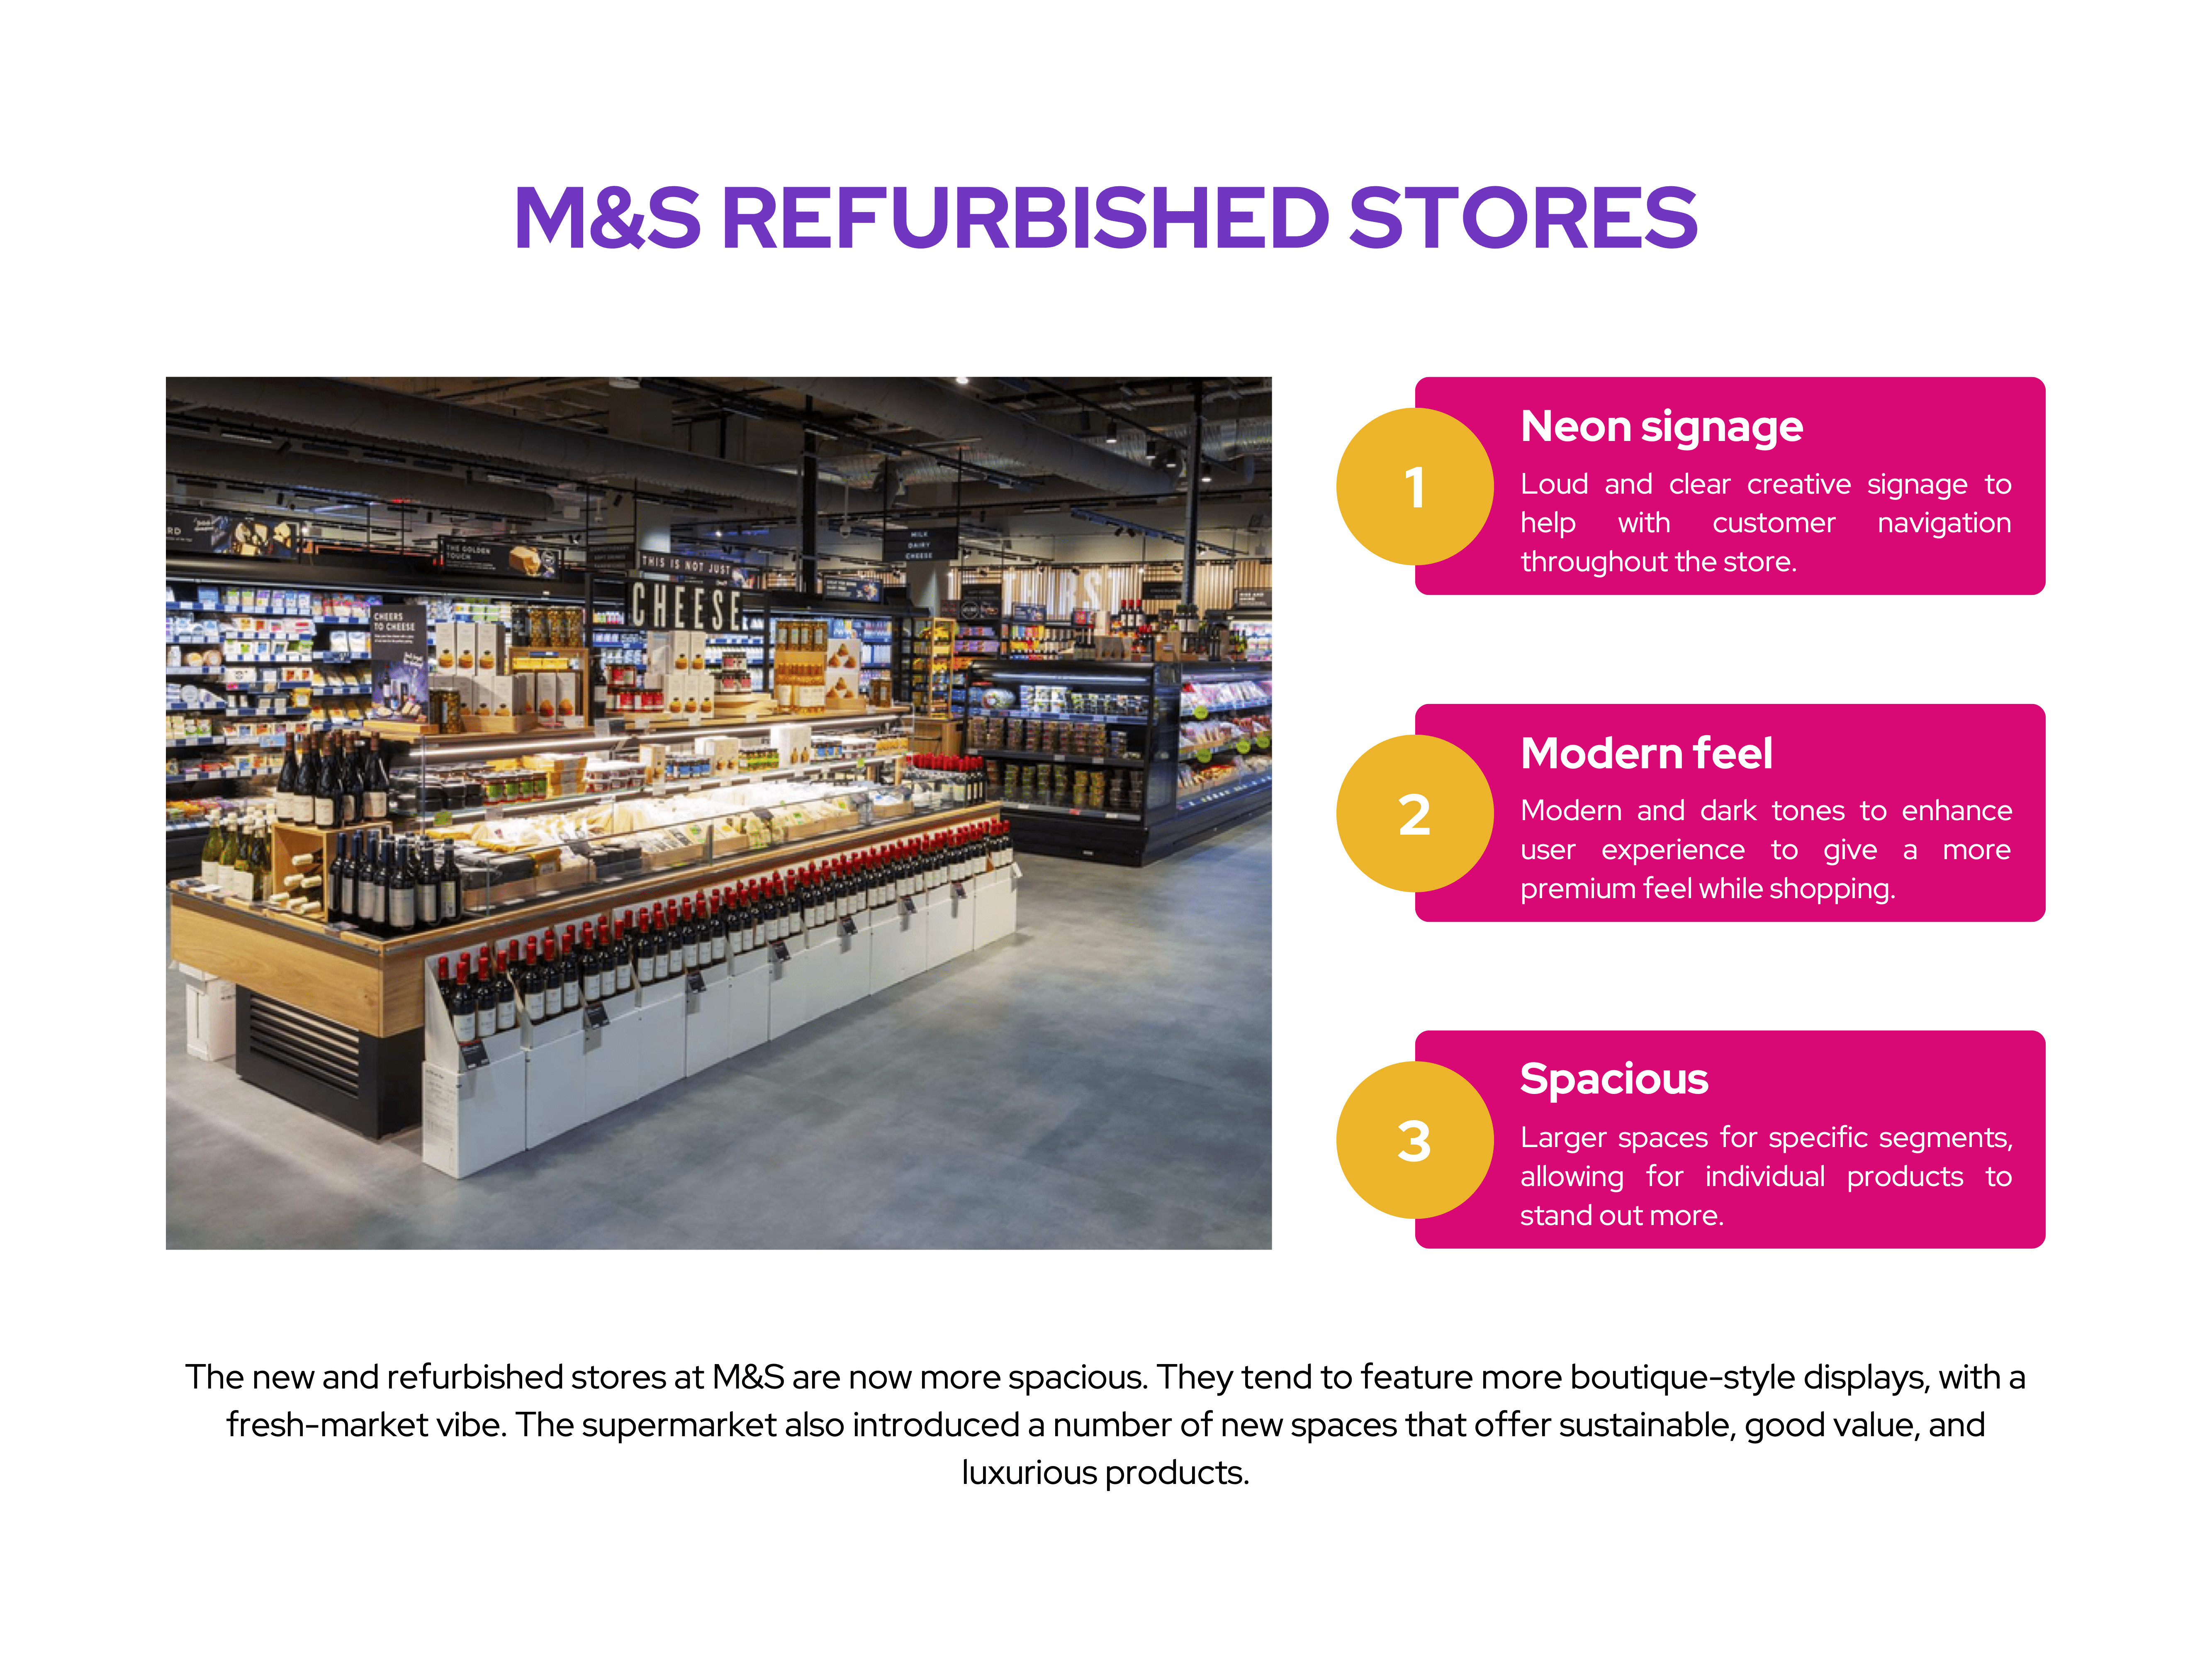 M&S: Refurbished Stores